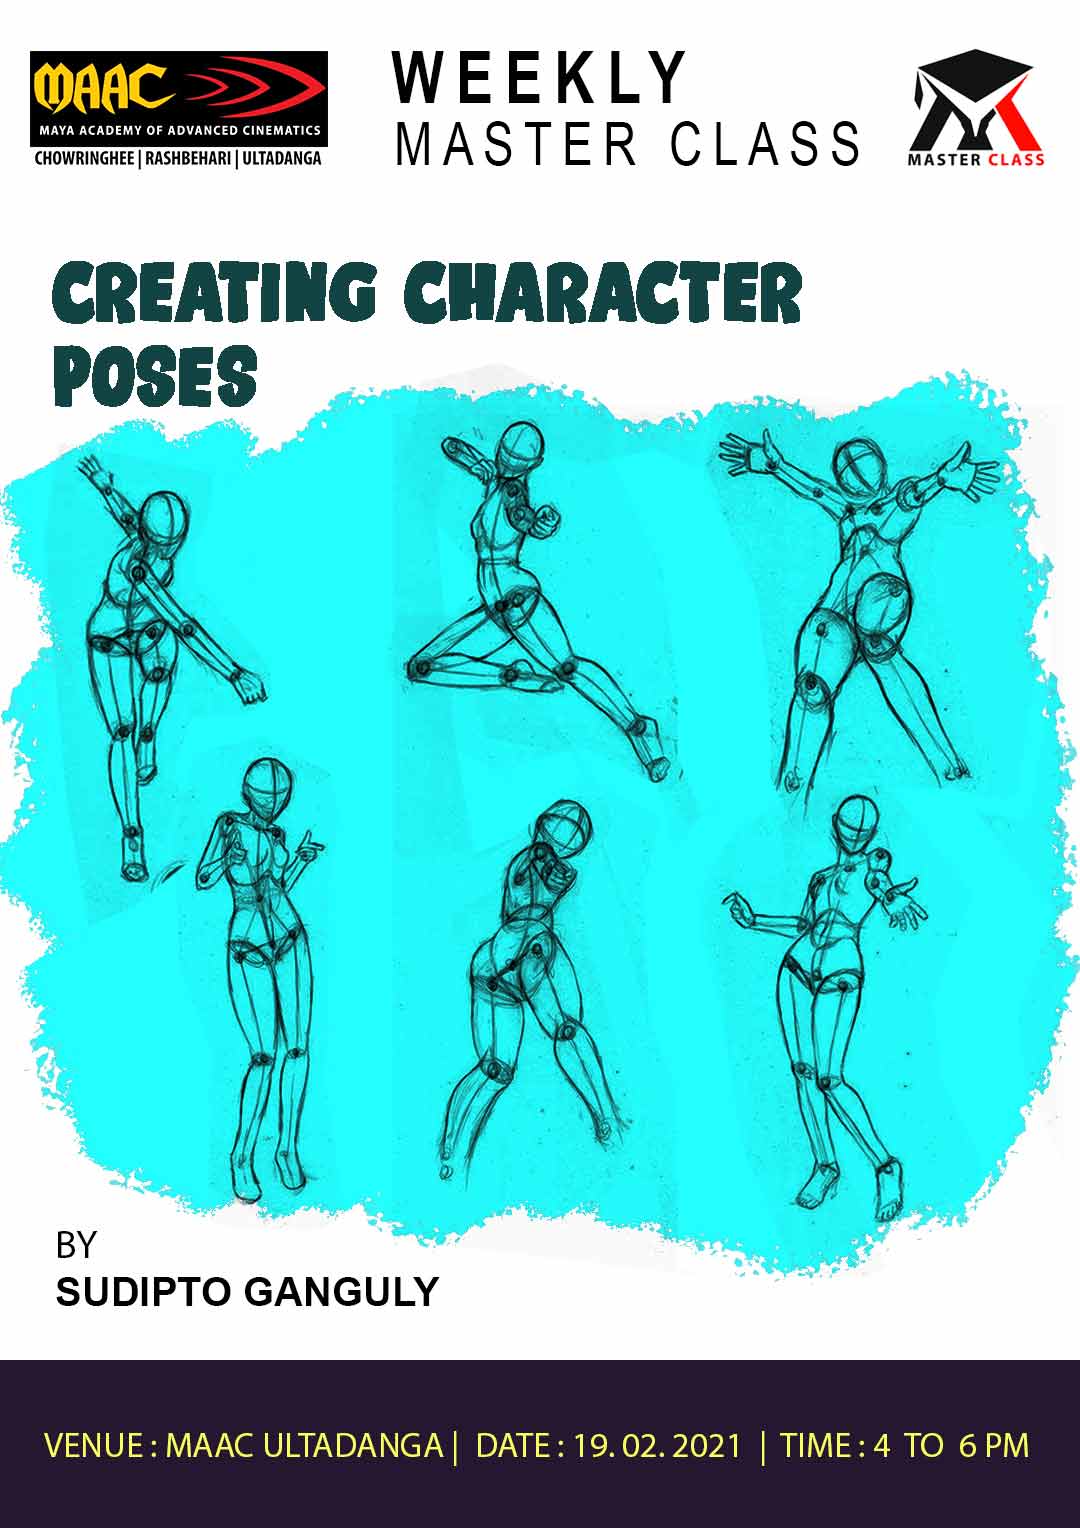 Weekly Master Class on Creating Character Poses